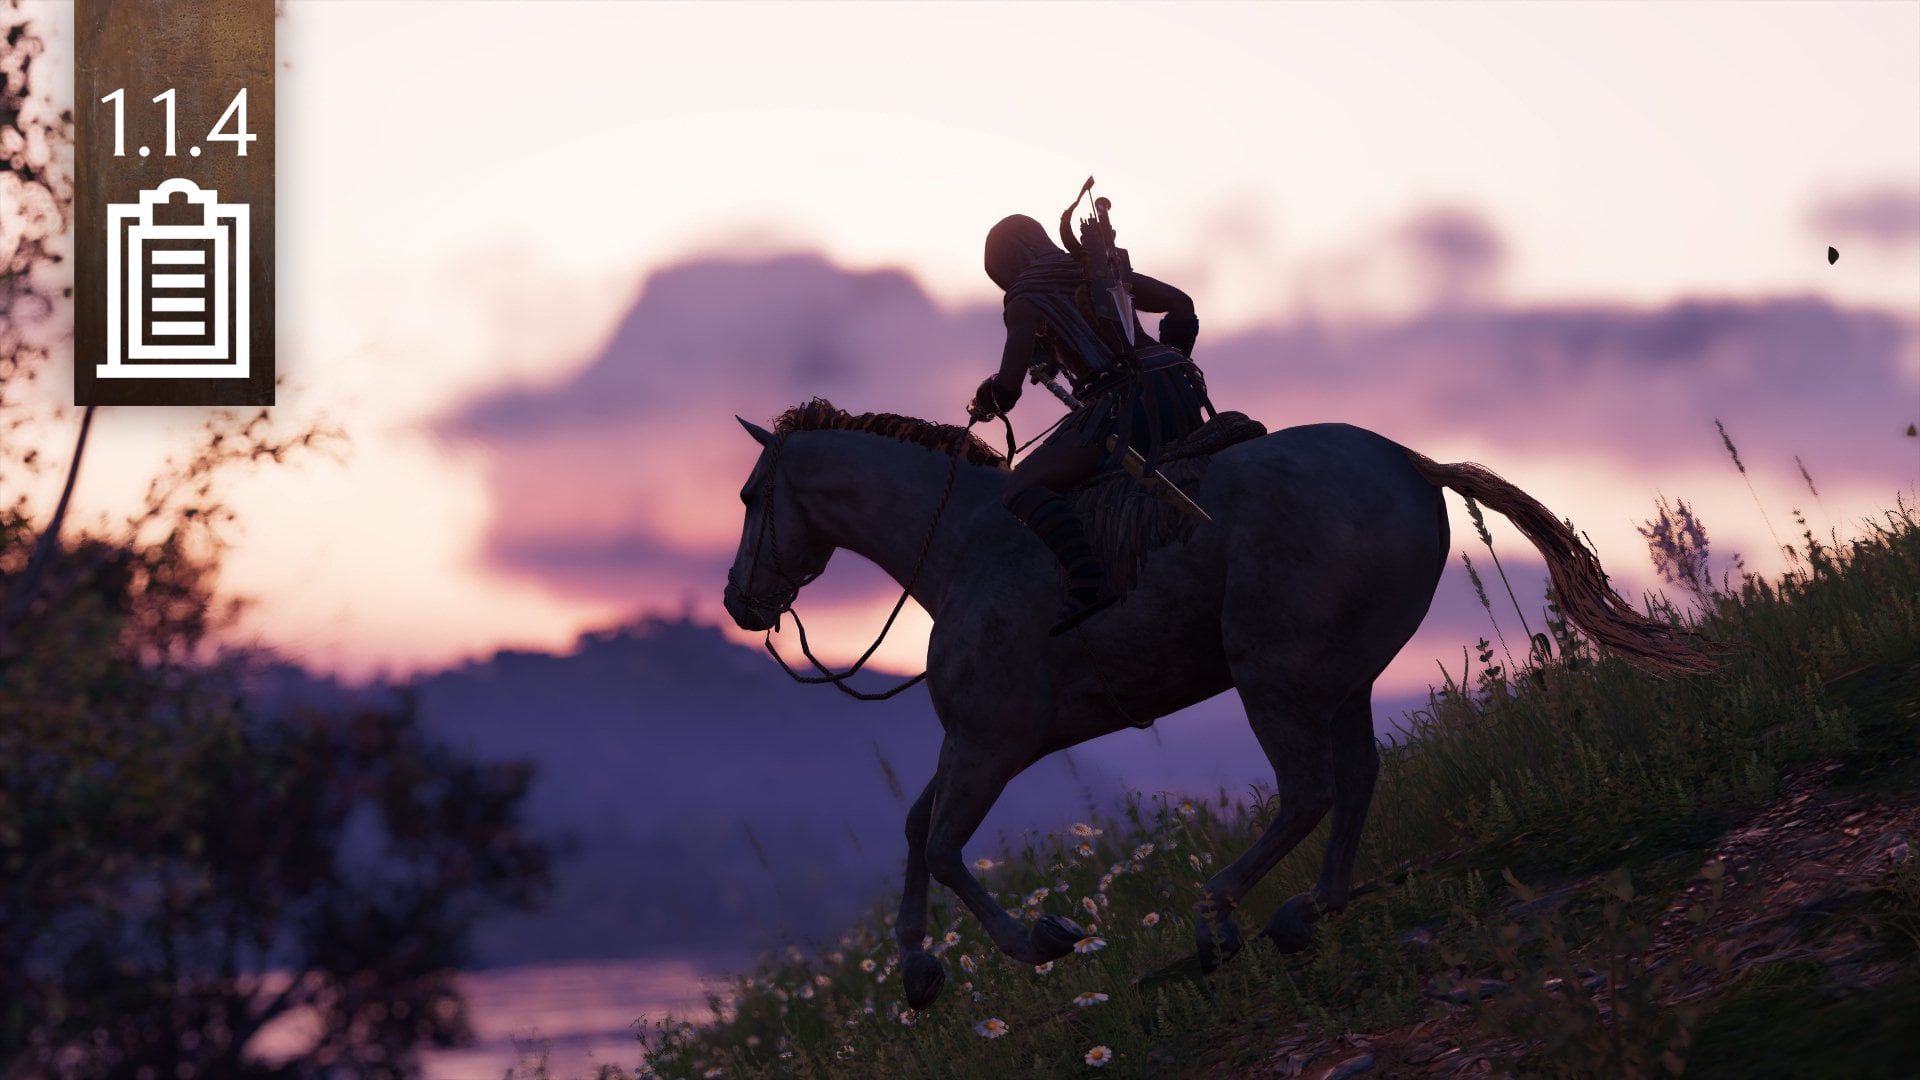 Ubisoft Reveals Assassin’s Creed Odyssey 1.14 Update Patch Notes